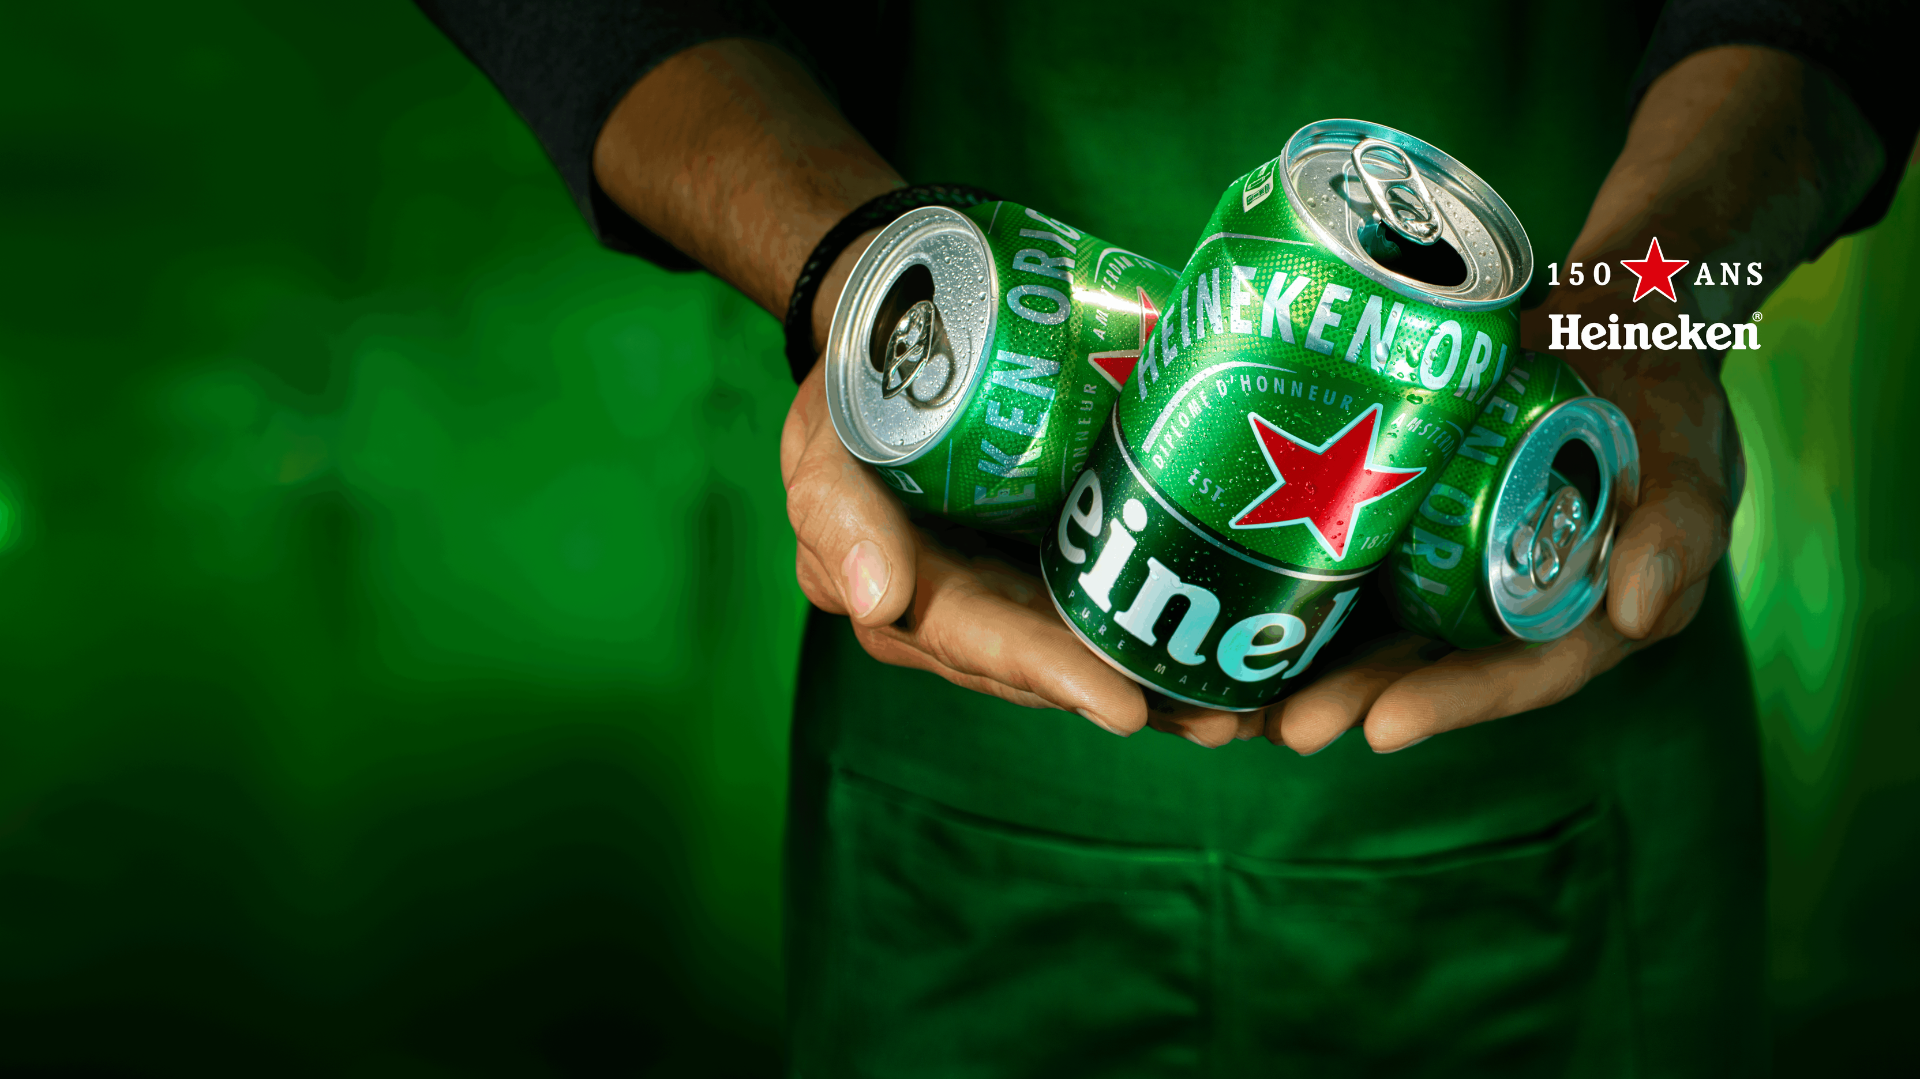 Heineken Campagne 150 Ans Canette Recyclable (2)